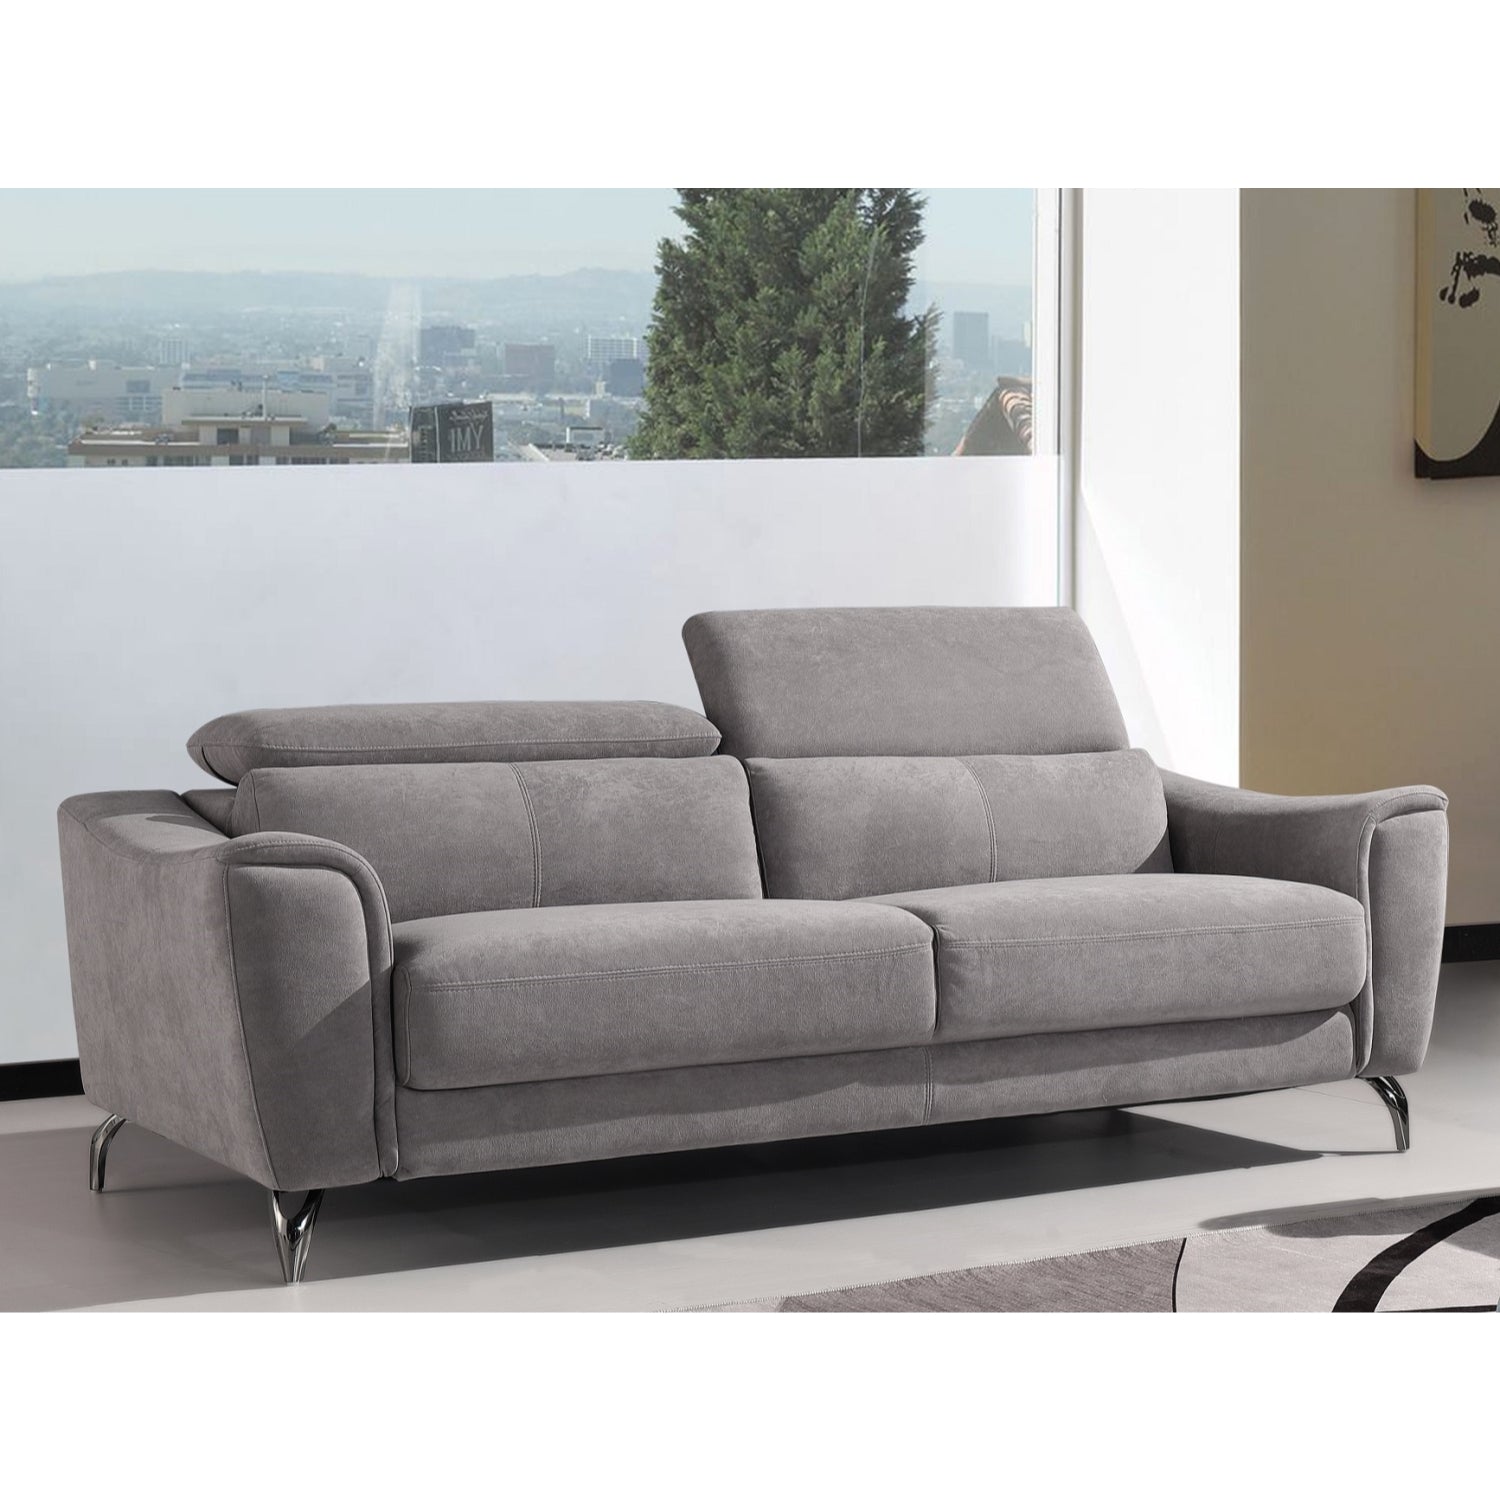 ViscoLogic Lancaster Adjustable Headrest Luxury Fabric 3-Seater Sofa/ Couch, Loveseat & Arm Chair (Grey (For GTA AREA ONLY)